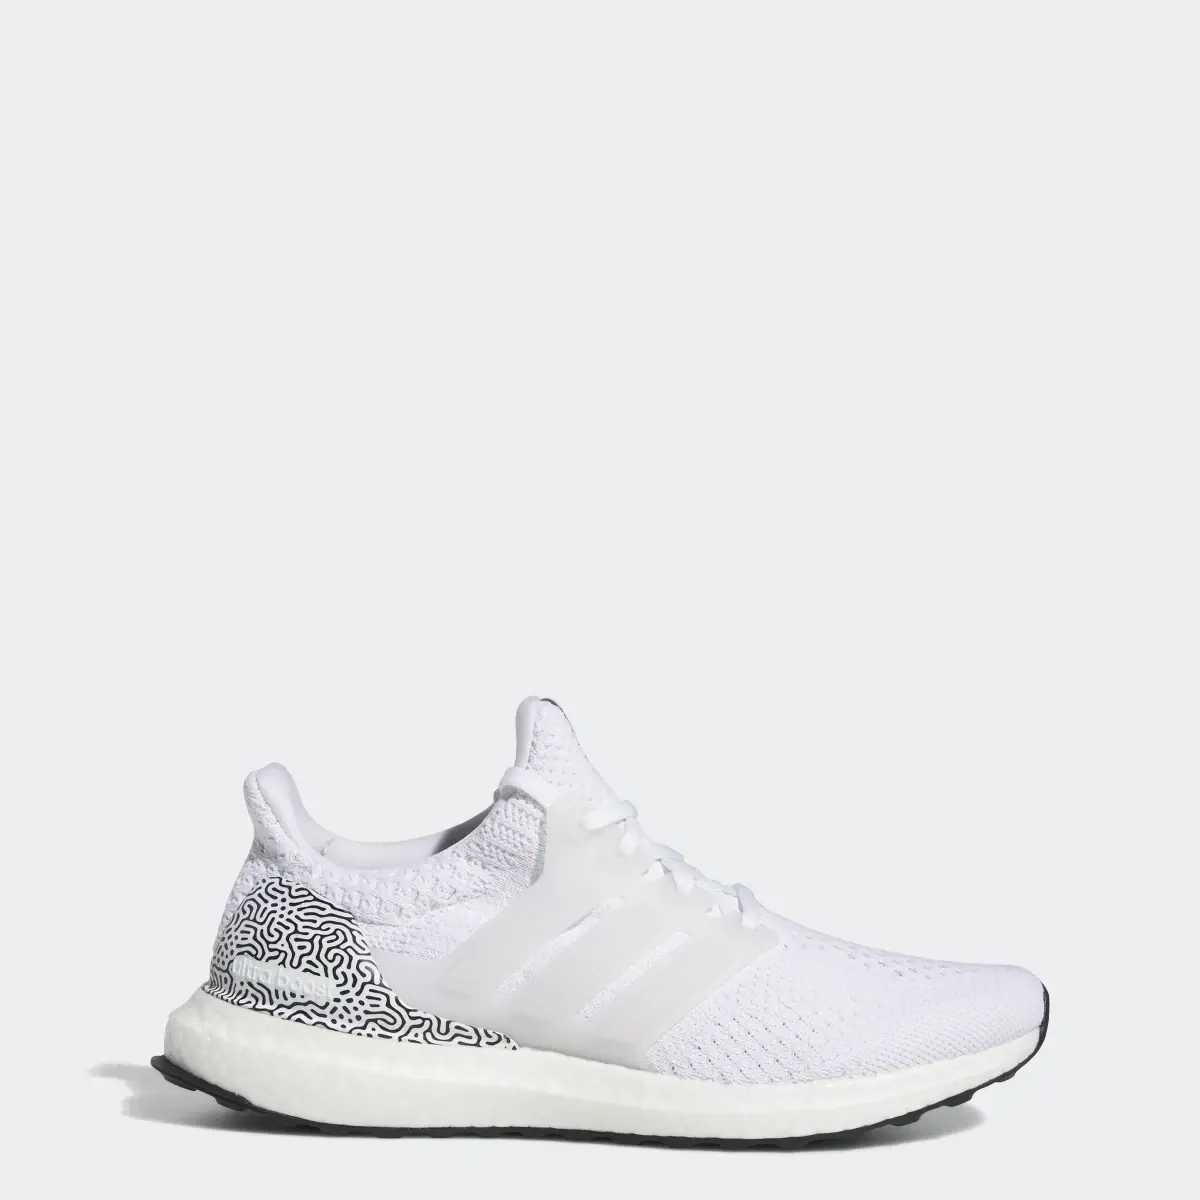 Adidas Ultraboost DNA Shoes. 1